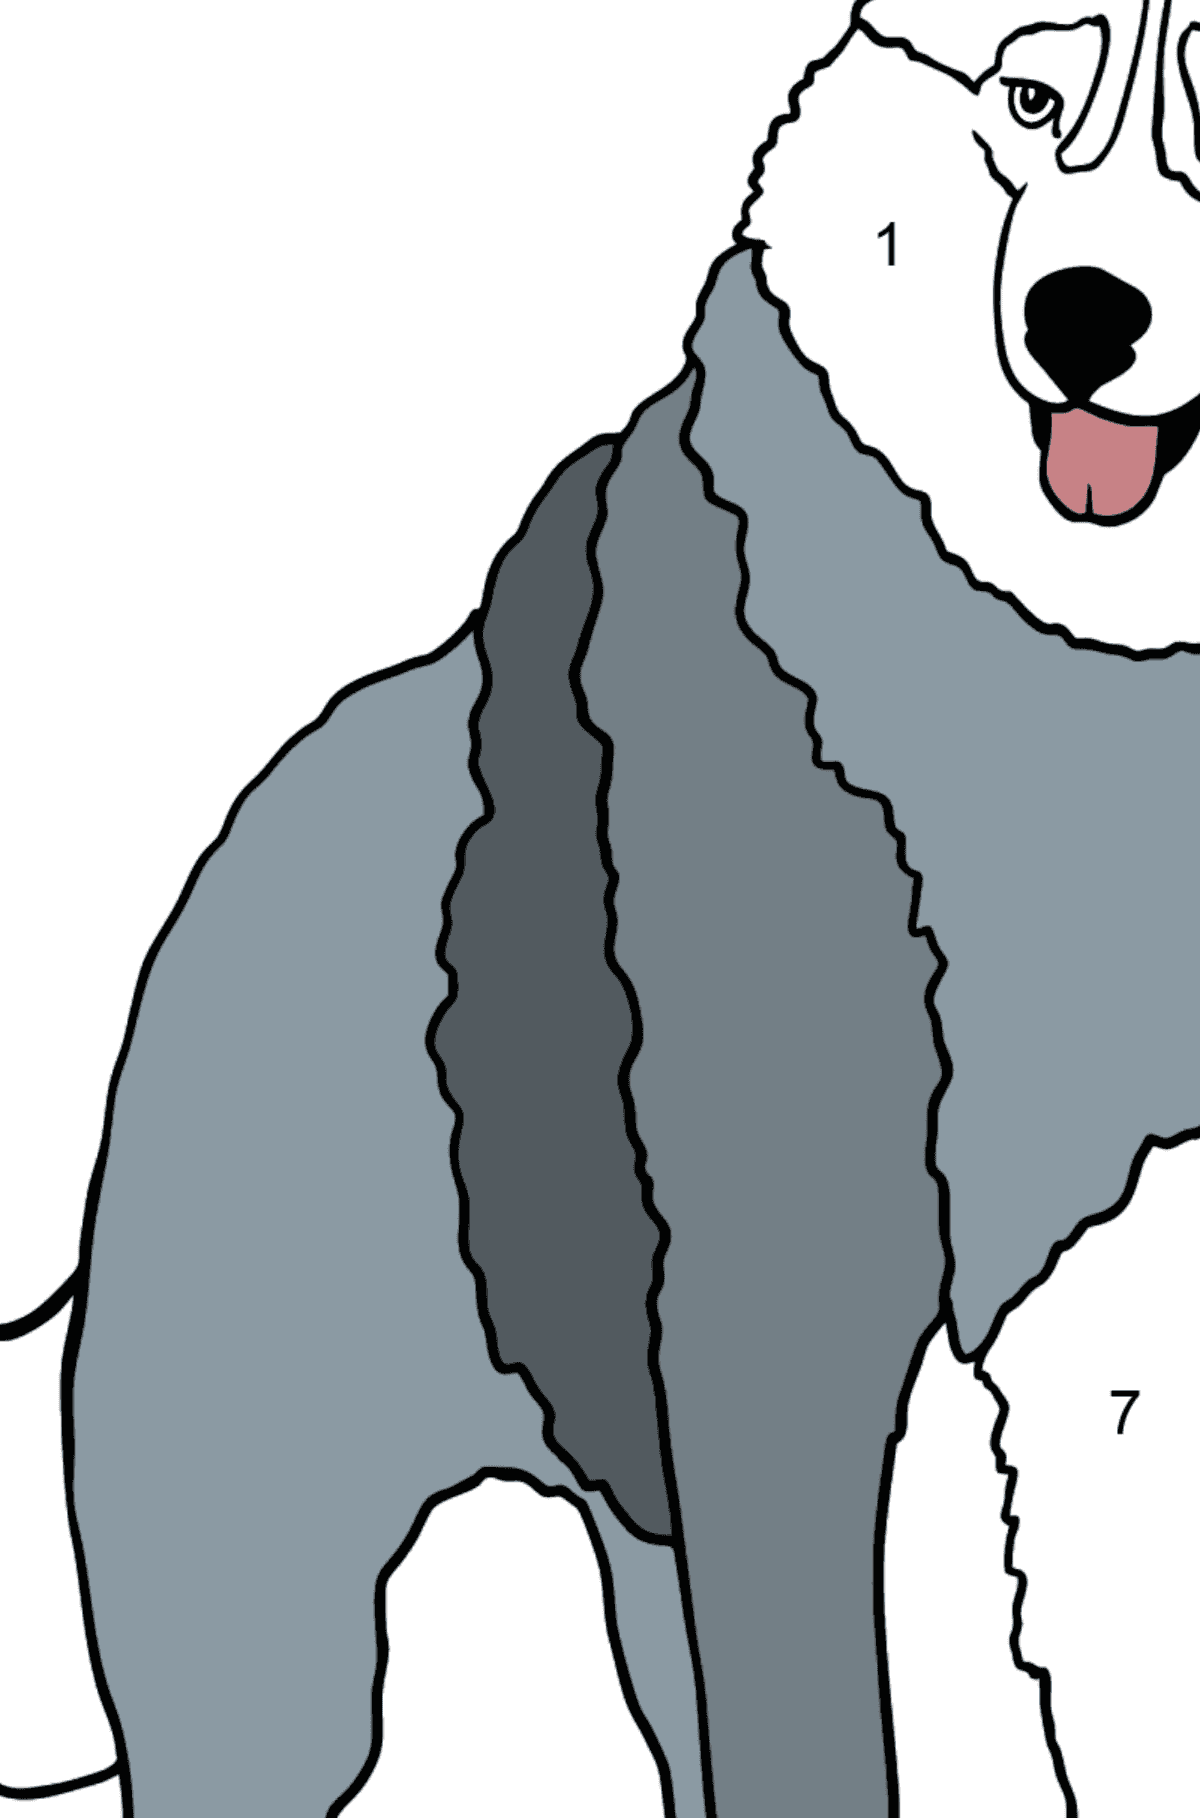 Husky coloring page - Coloring by Numbers for Kids